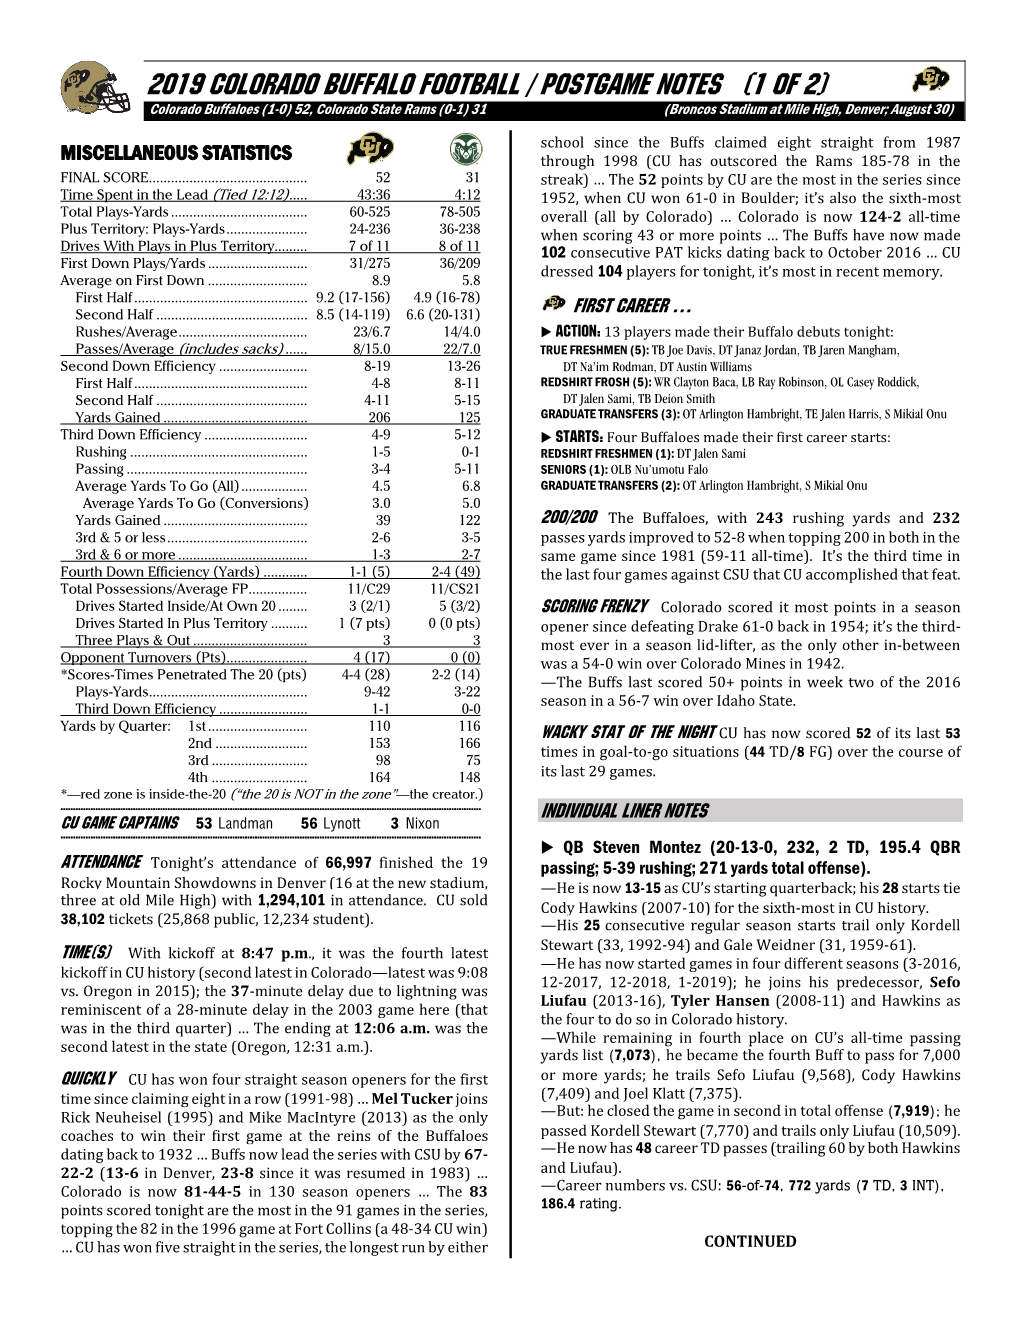 2019 COLORADO BUFFALO FOOTBALL / POSTGAME NOTES (1 of 2) Colorado Buffaloes (1-0) 52, Colorado State Rams (0-1) 31 (Broncos Stadium at Mile High, Denver; August 30)